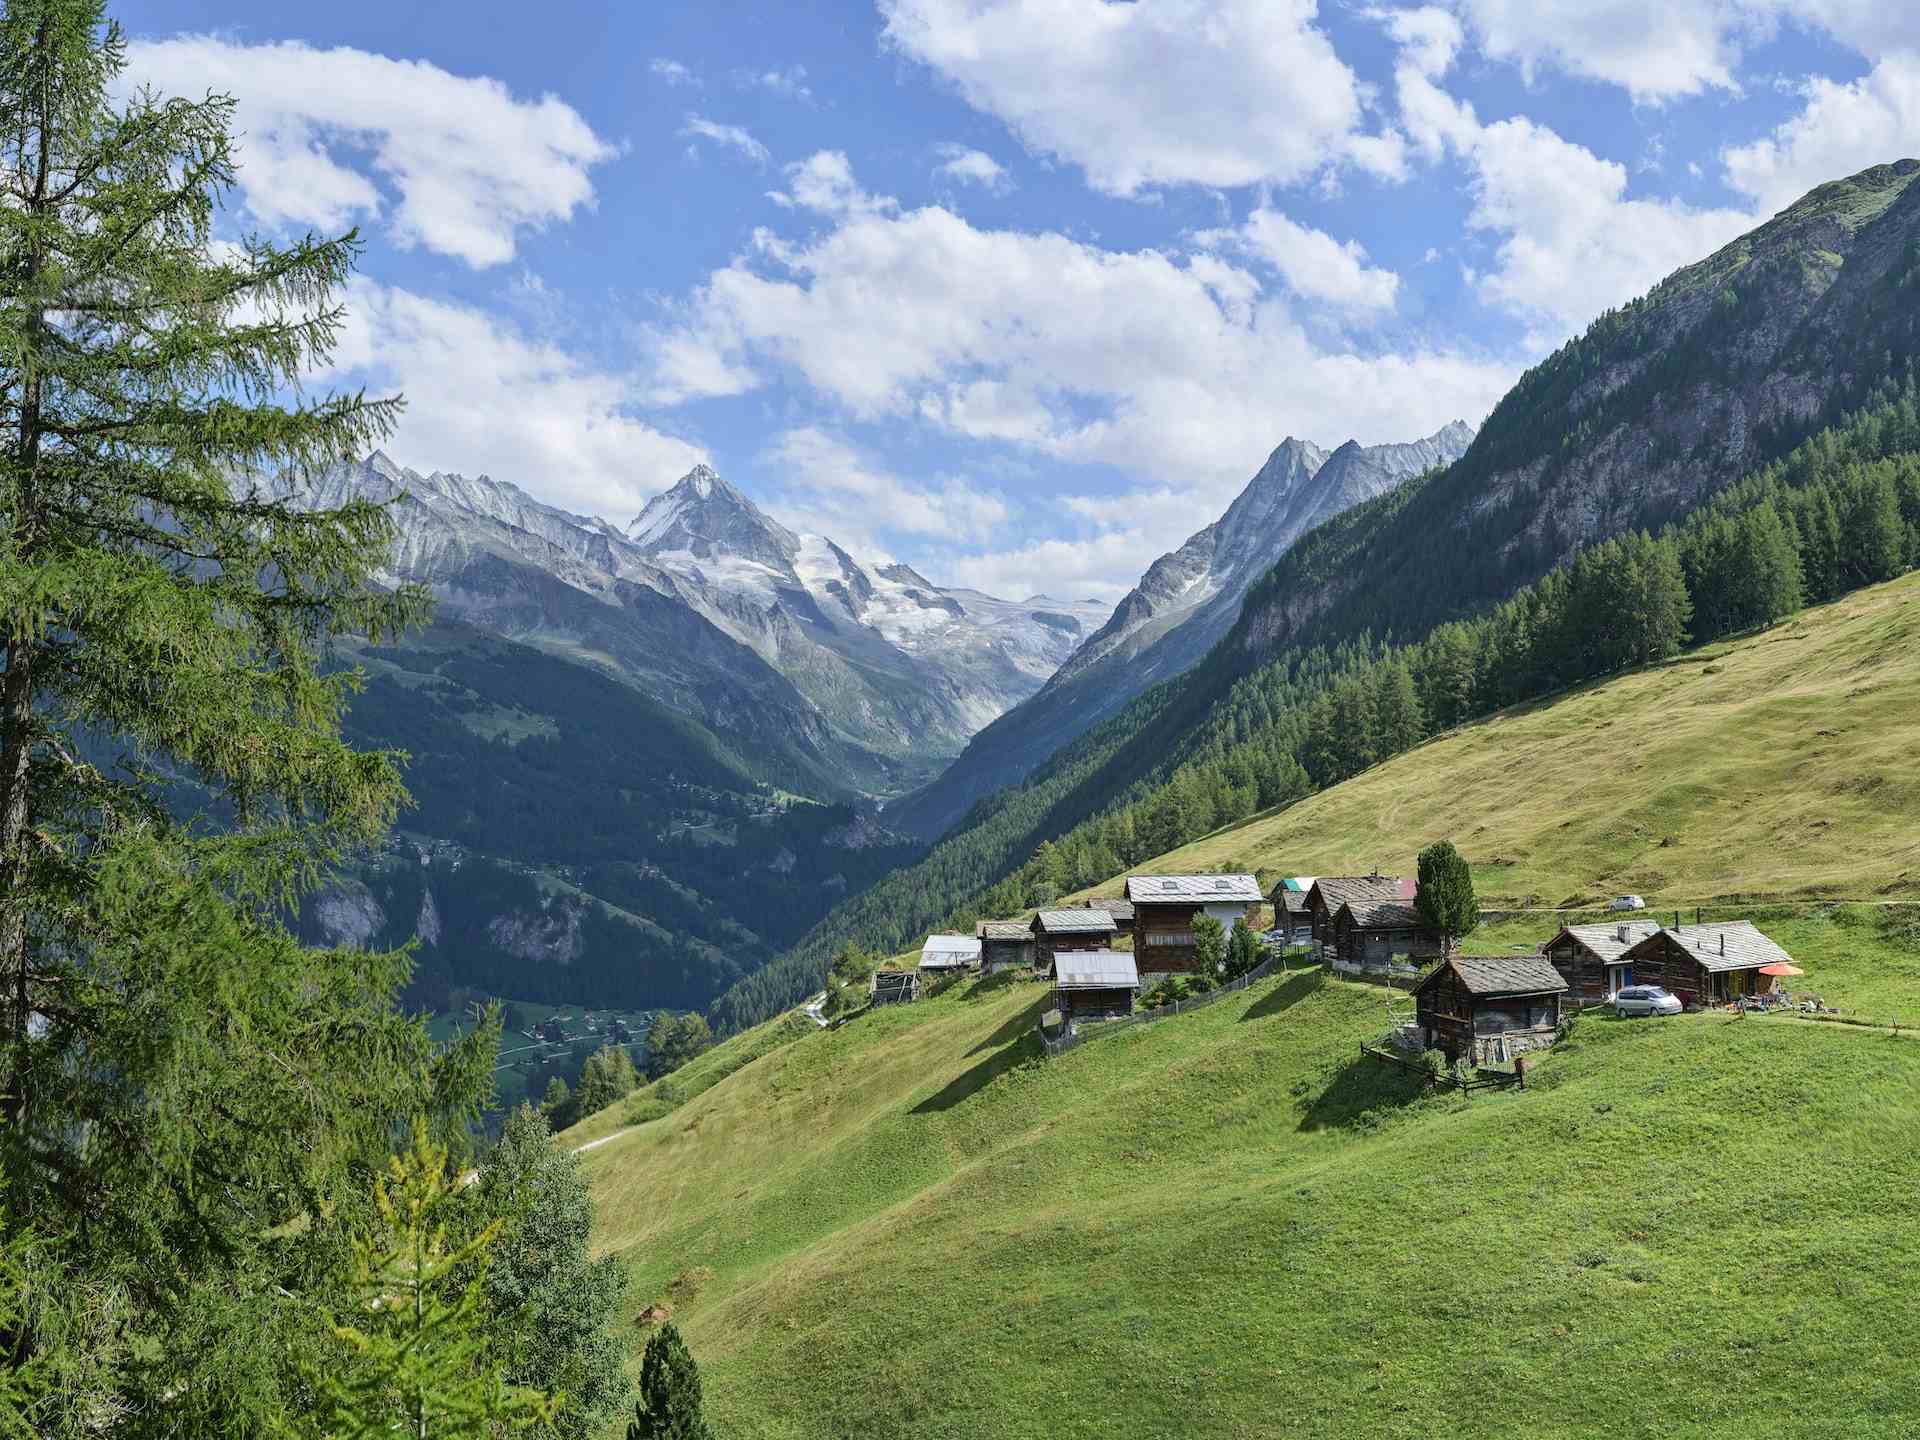 MIMONT, producer in Val D'illiez canton of Valais in Switzerland, | Mimelis